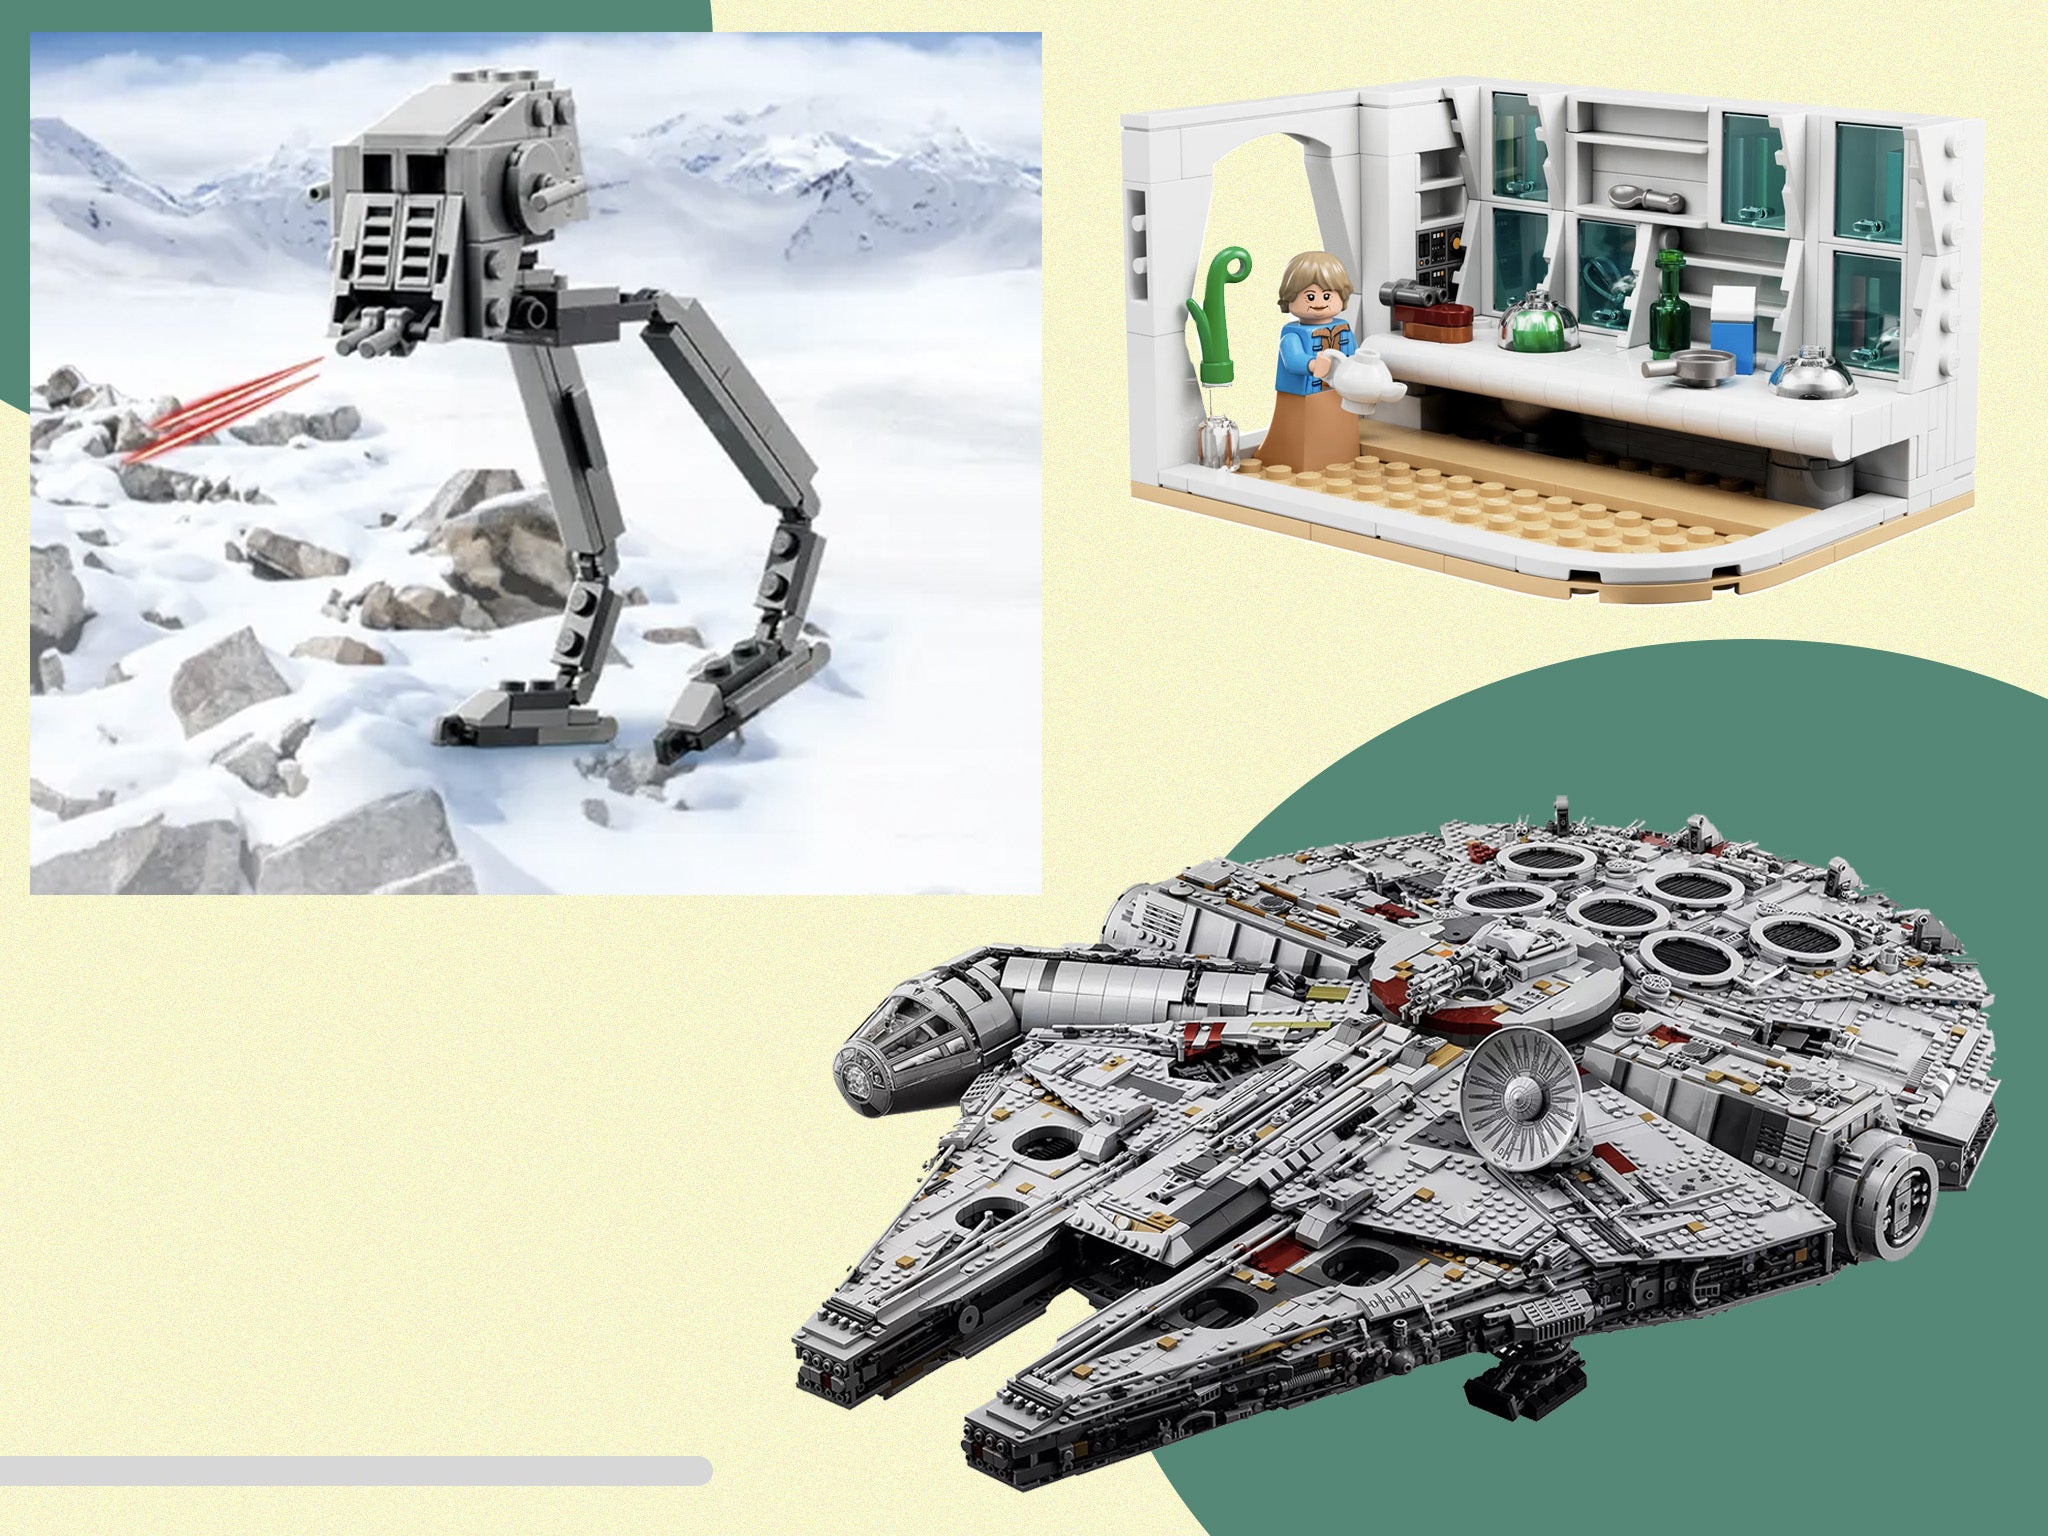 Løve udvide scaring Star Wars Day 2022: Lego is giving away free gifts | The Independent